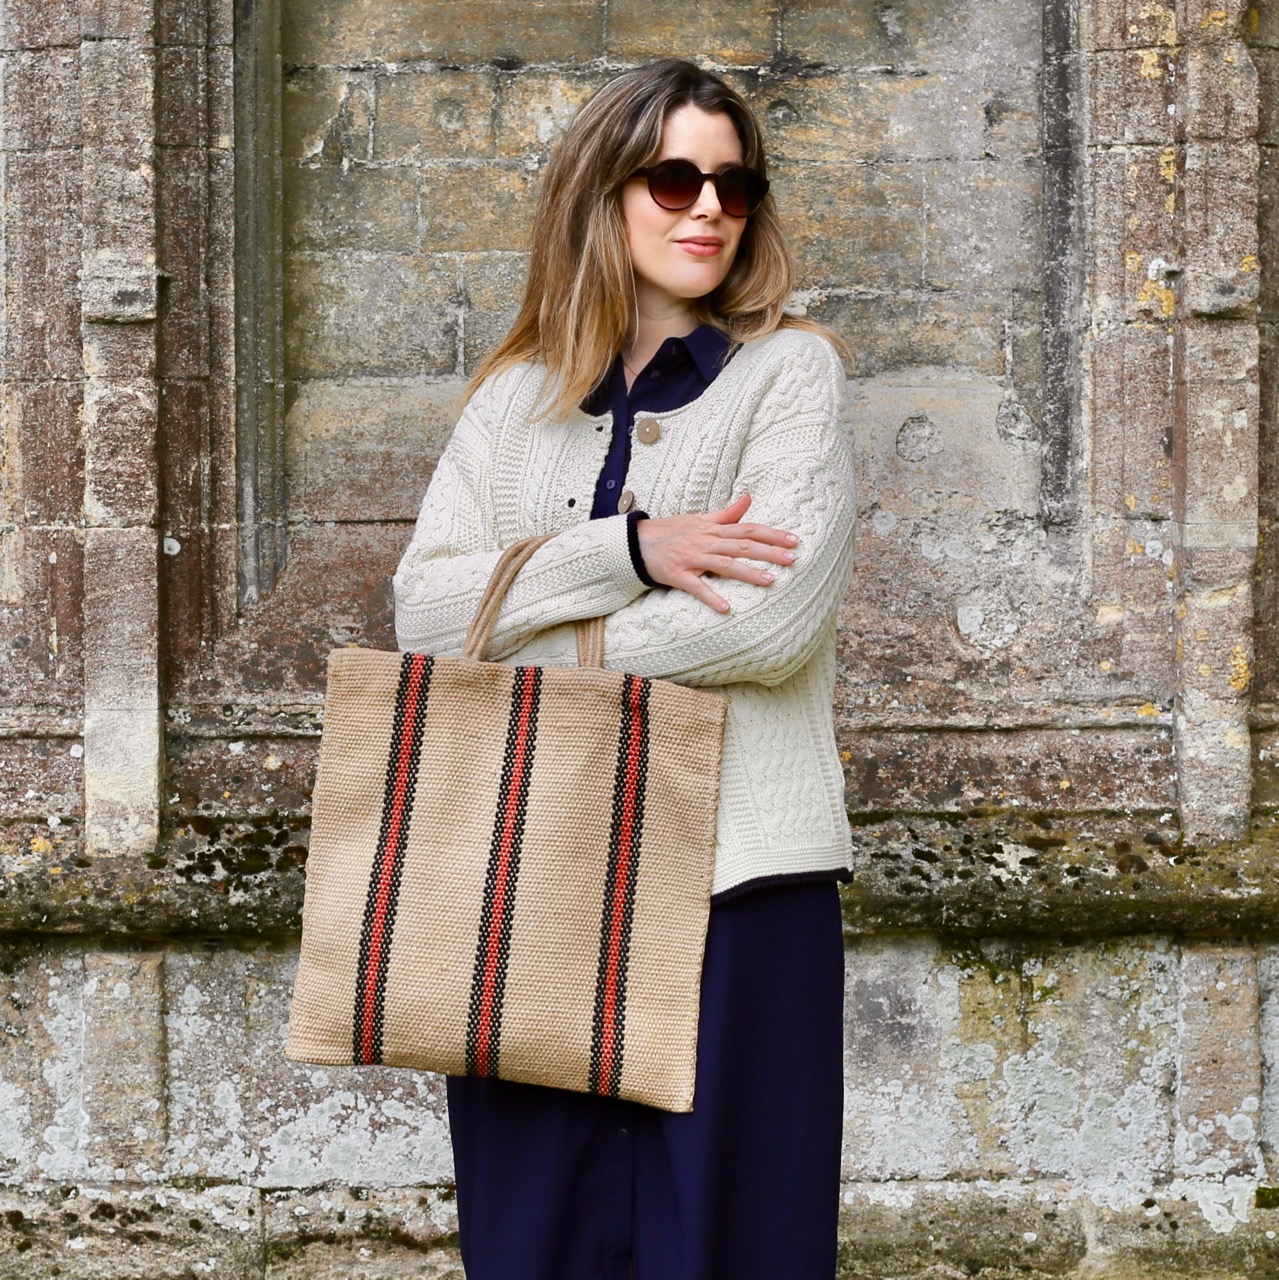 Celtic & Co Cardigan and Turtle Bags jute bag